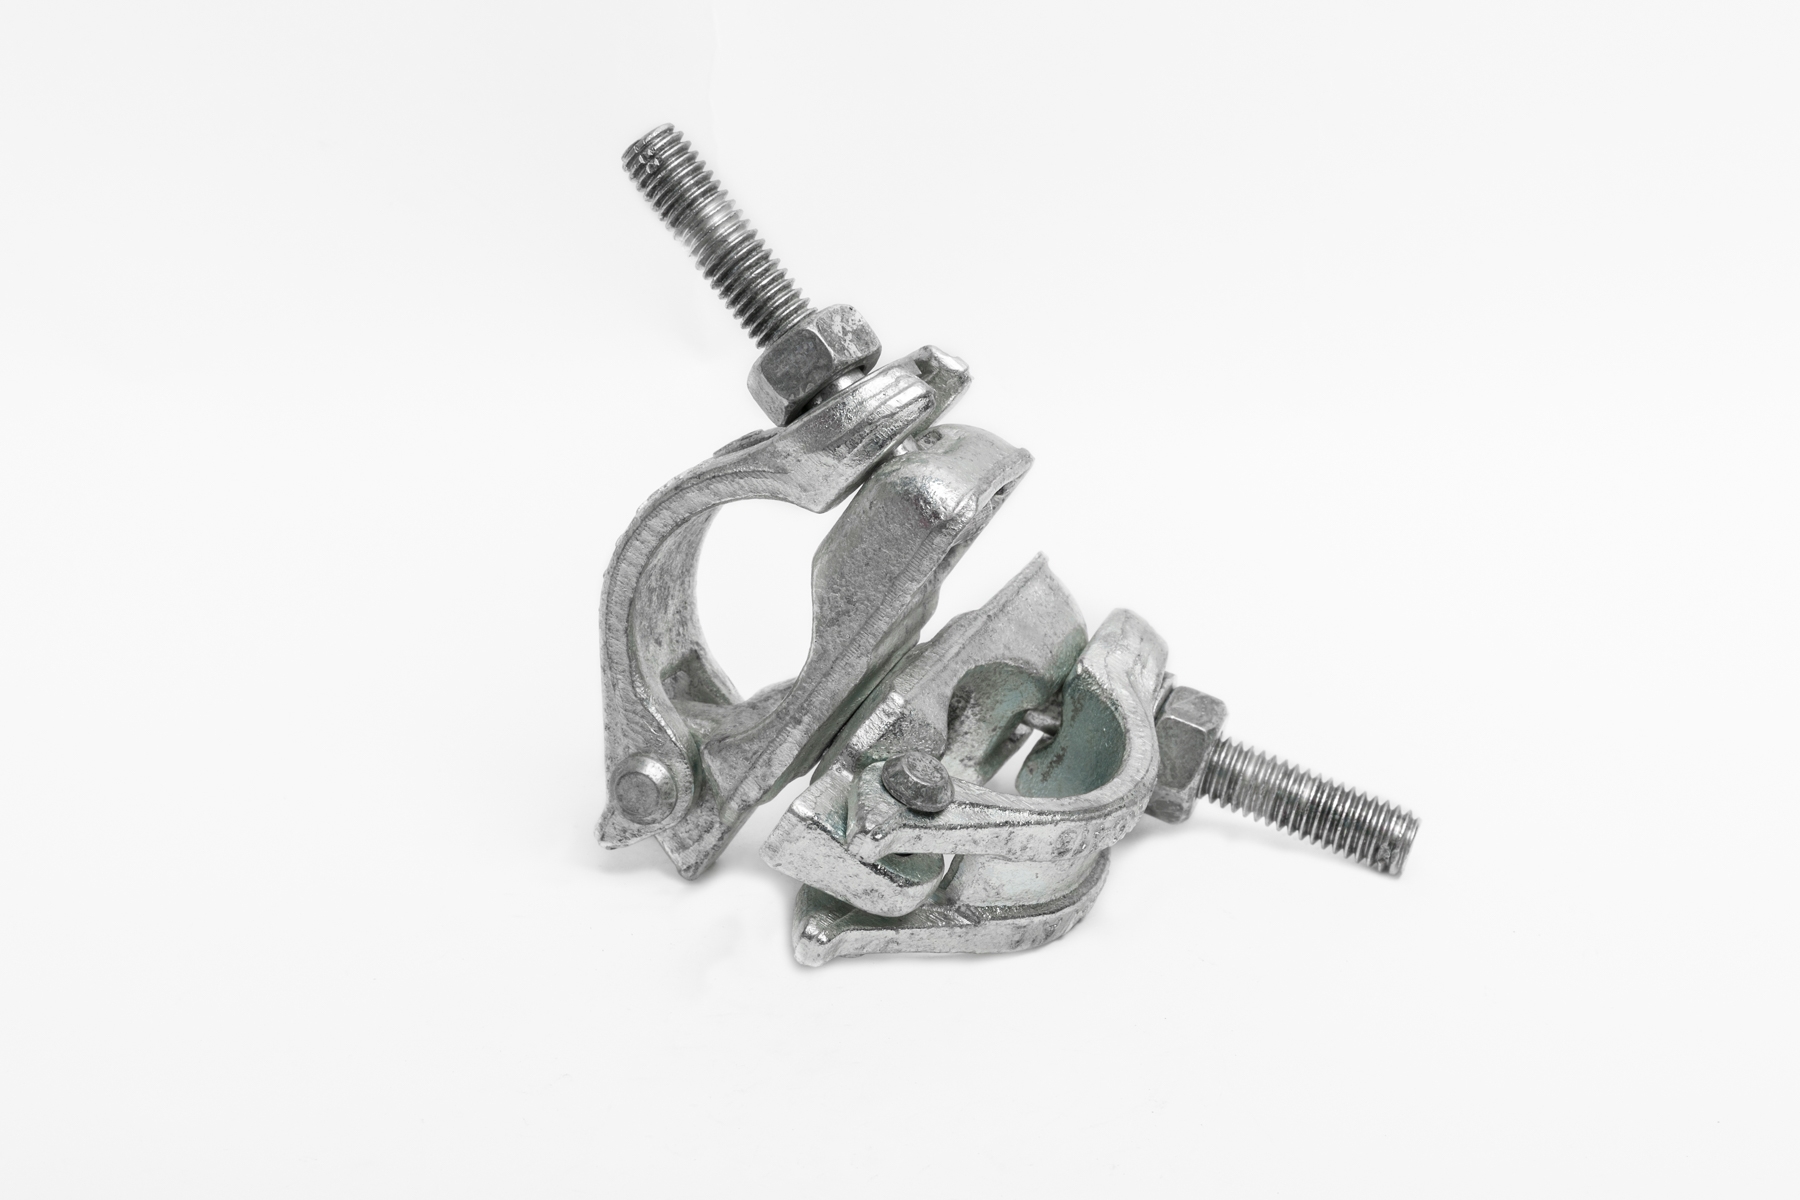 Drop Forged Swivel Coupler - George Roberts